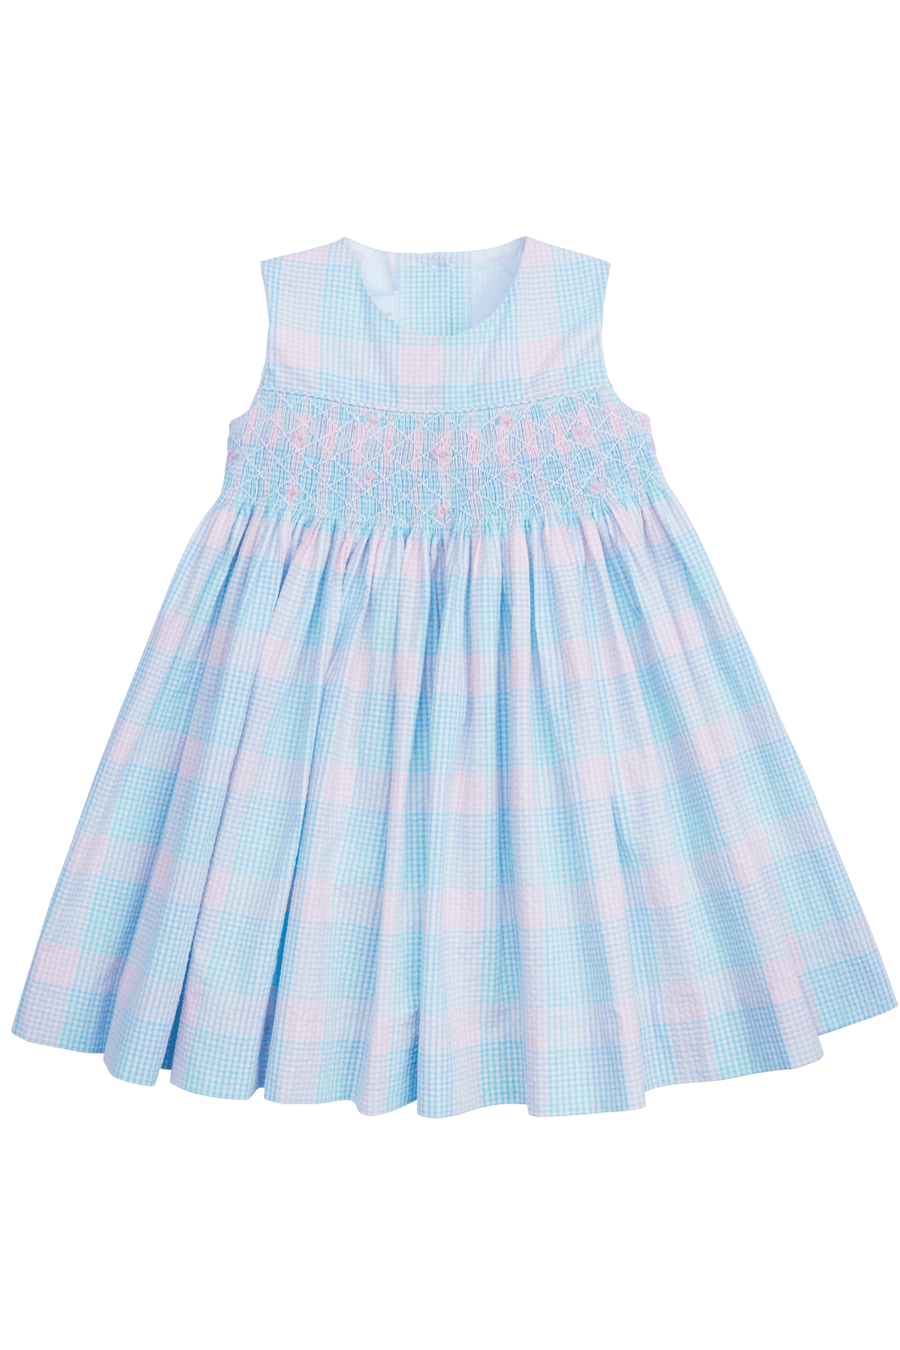 classic childrens clothing girls dress in pink and blue plaid with blue smocking detail